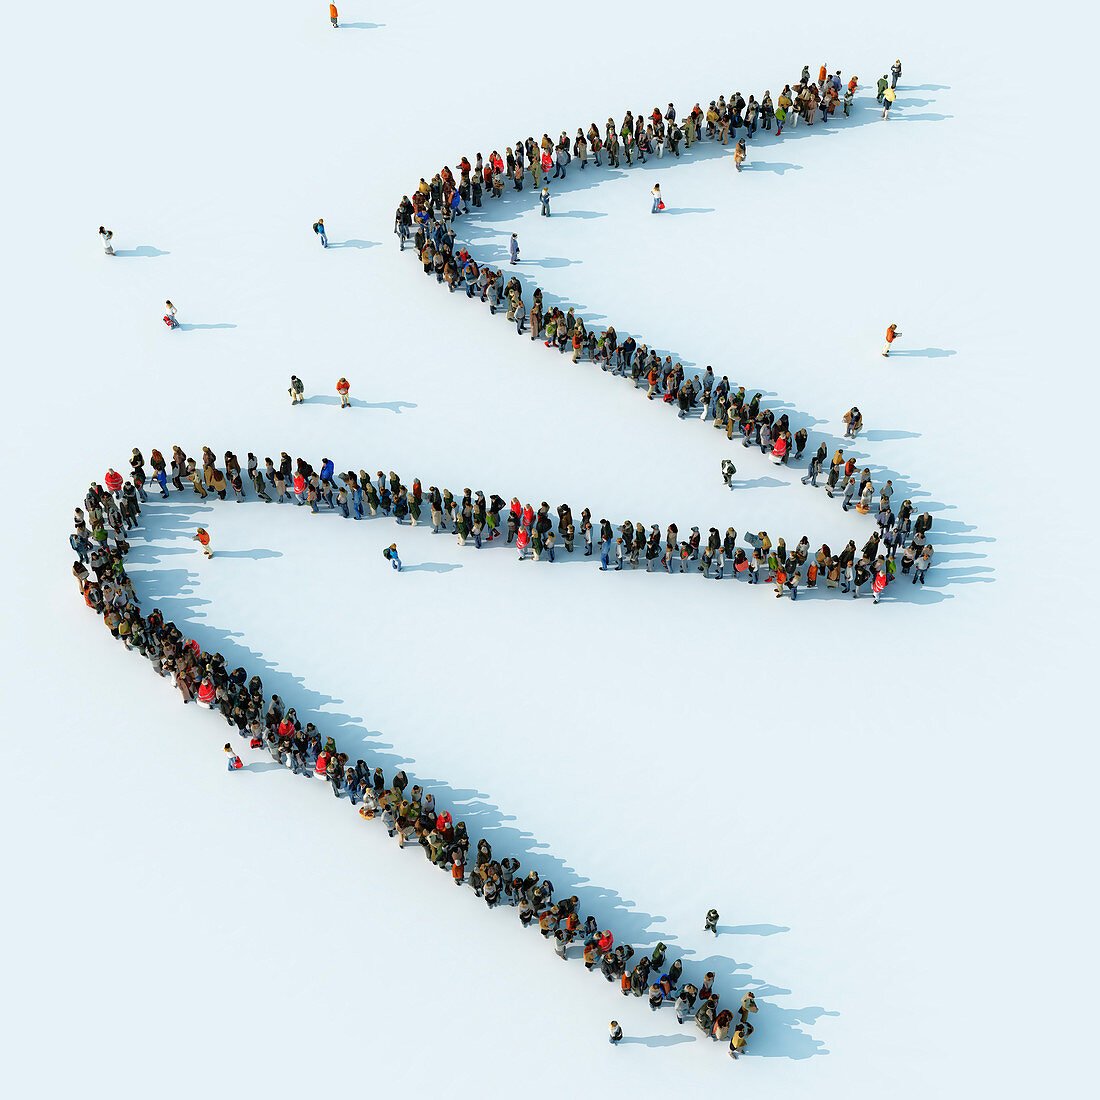 Queue of people waiting in a zigzag line, illustration